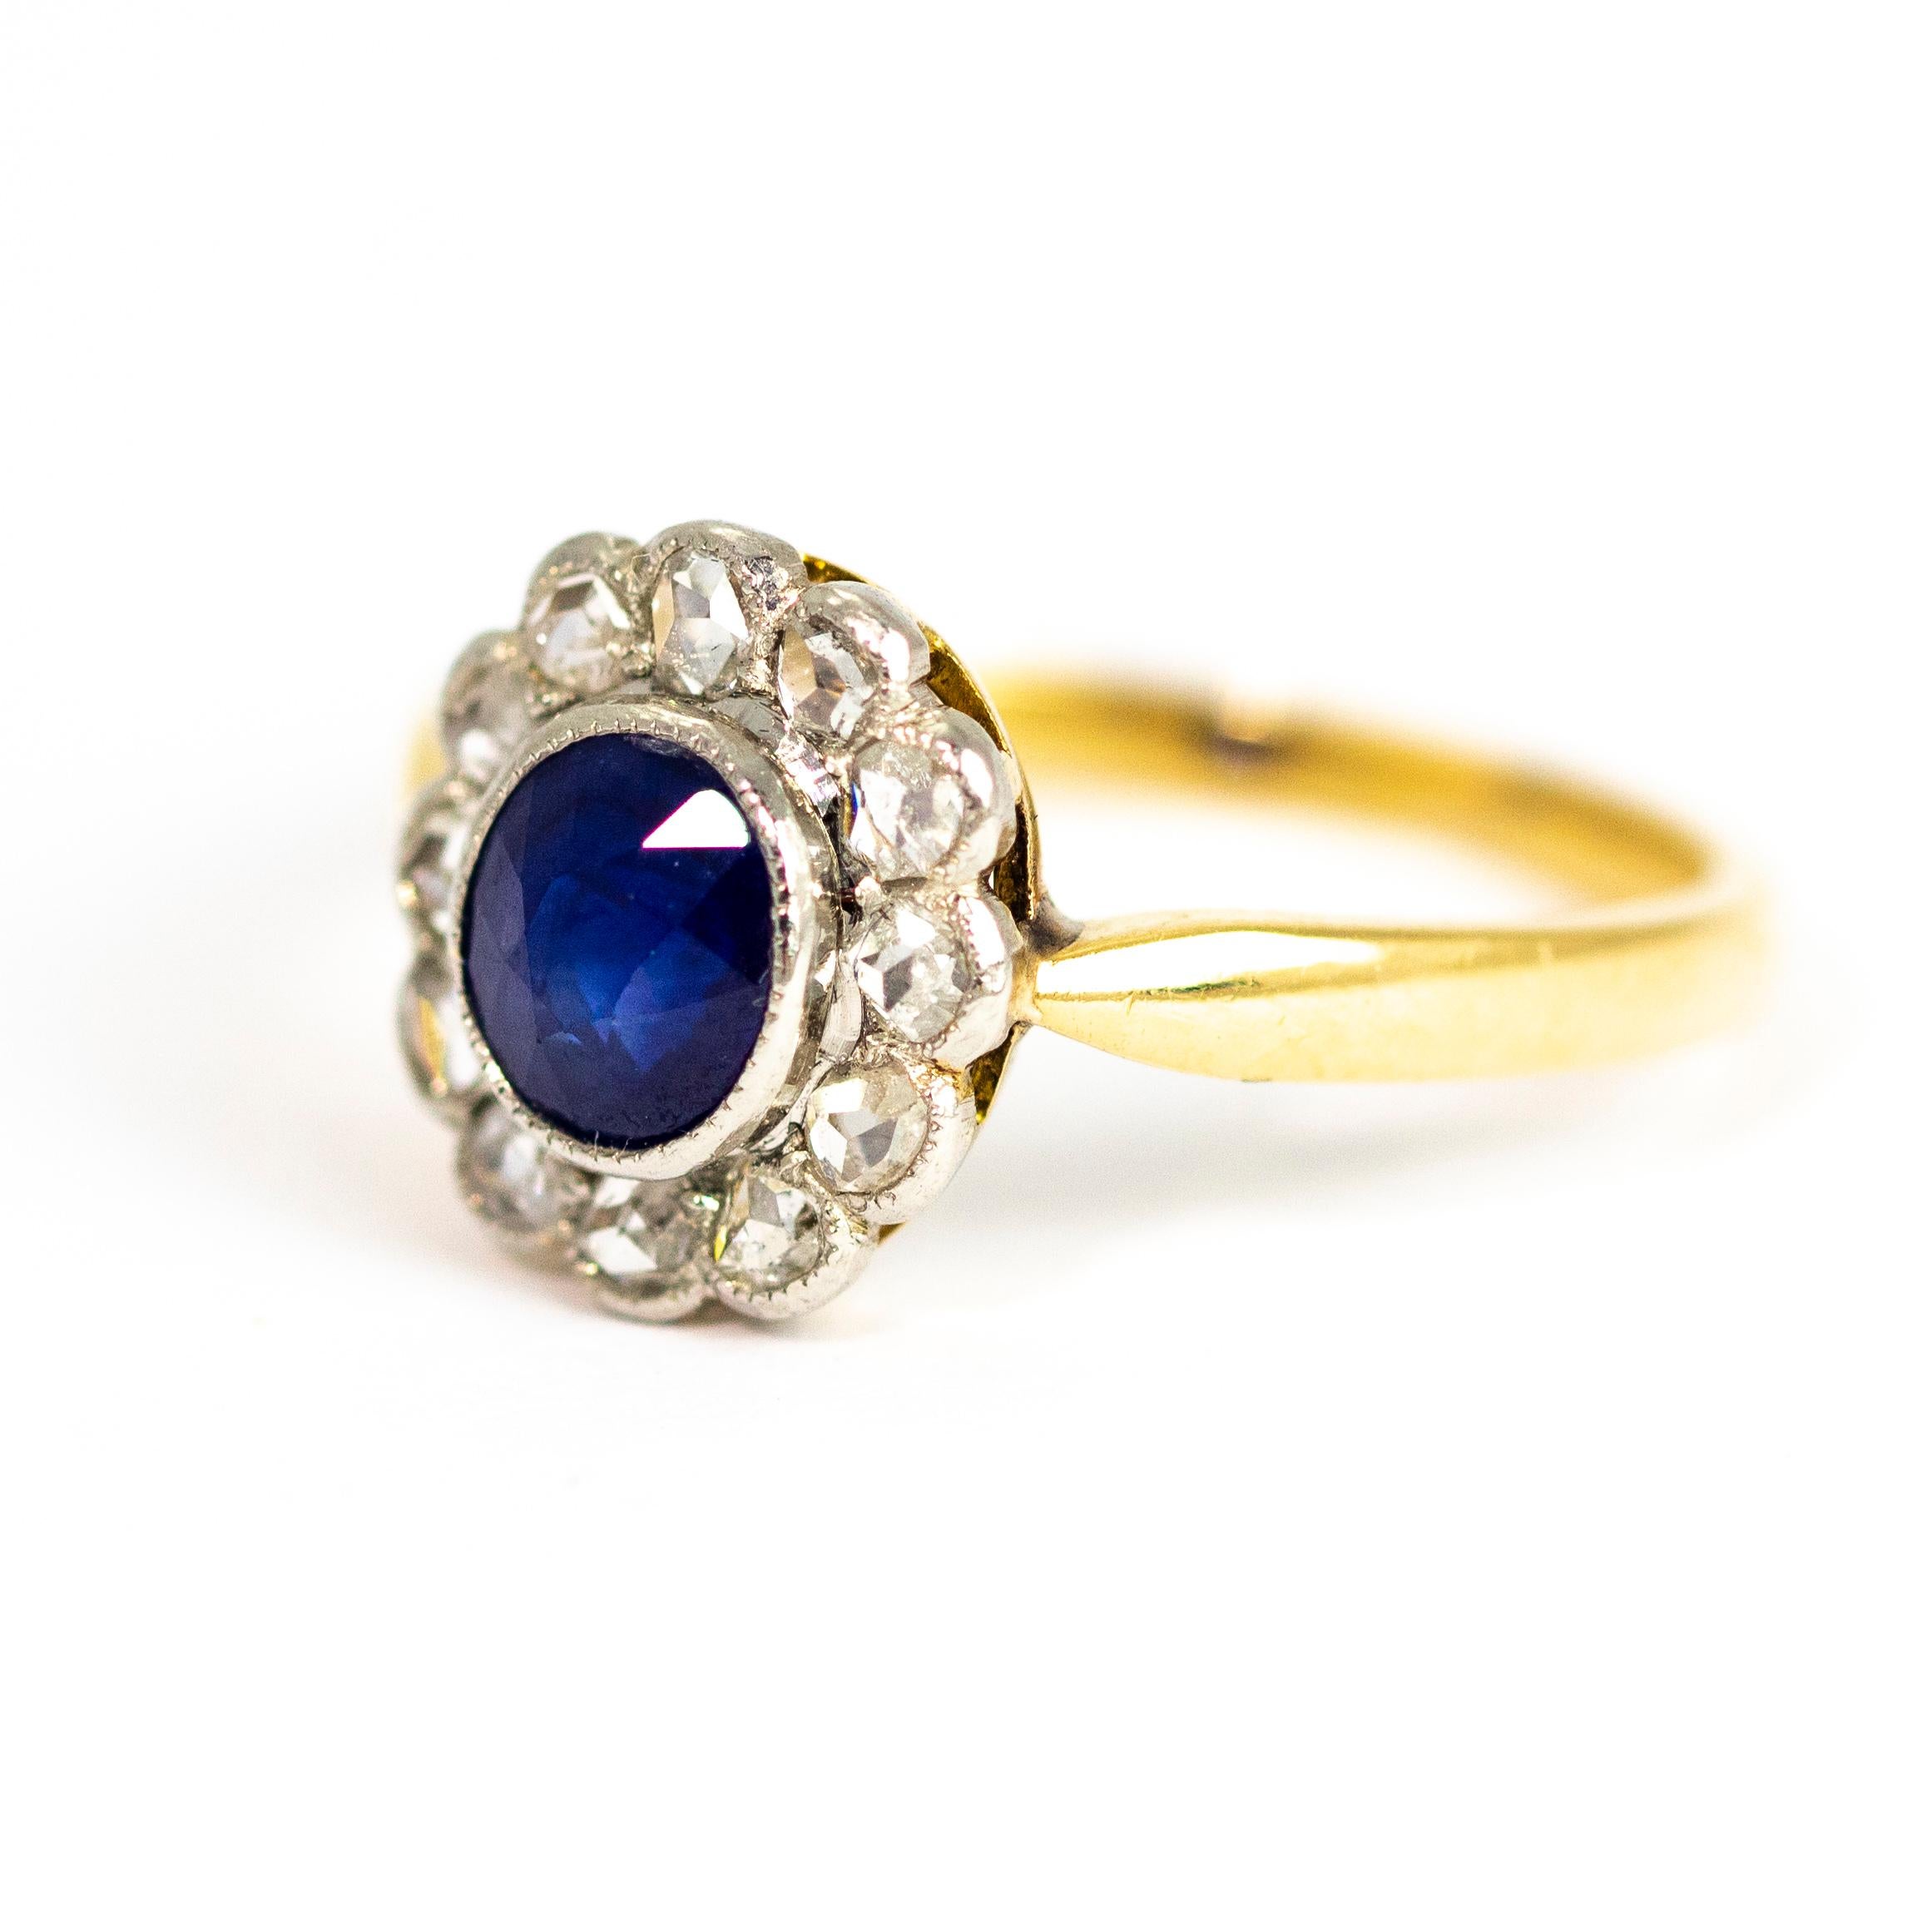 At the centre of this eye catching cluster ring is an oval blue sapphire and surrounding the stone is a shimmering halo of rose cut diamonds. The stones are set in platinum and the band is modelled in 18ct gold.

Ring Size: O 1/2 or 7 1/4